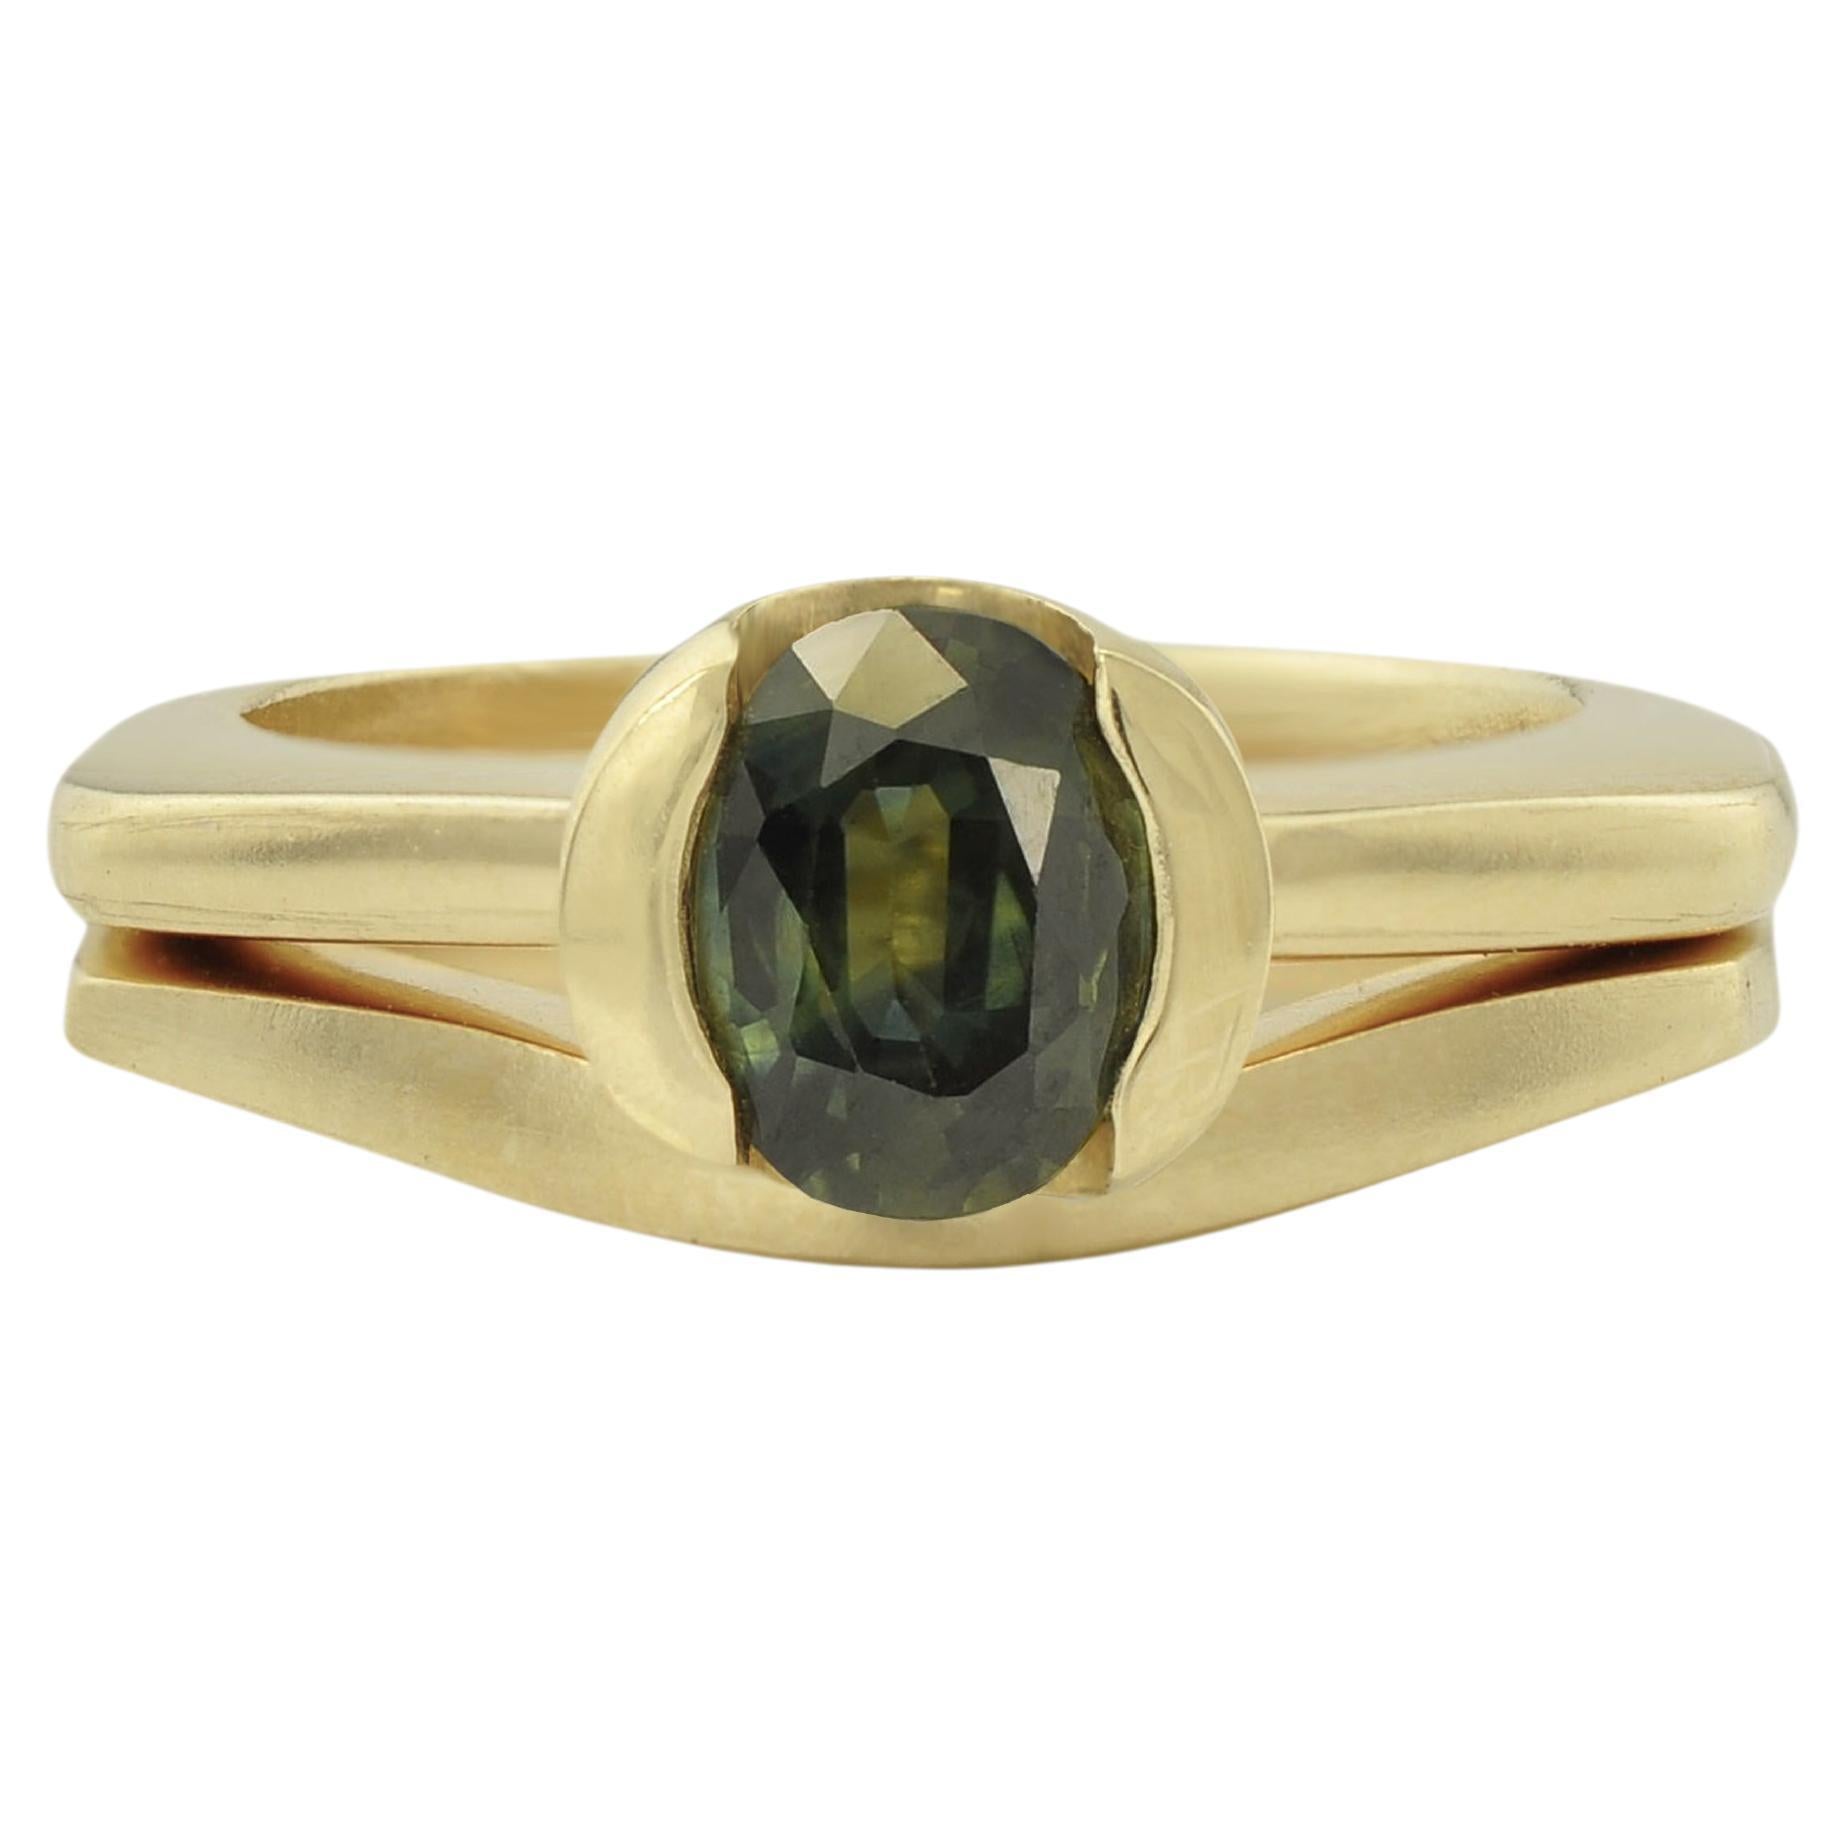 Susan Crow Studio FAIRMINED GOLD and GREEN SAPPHIRE RING SET For Sale